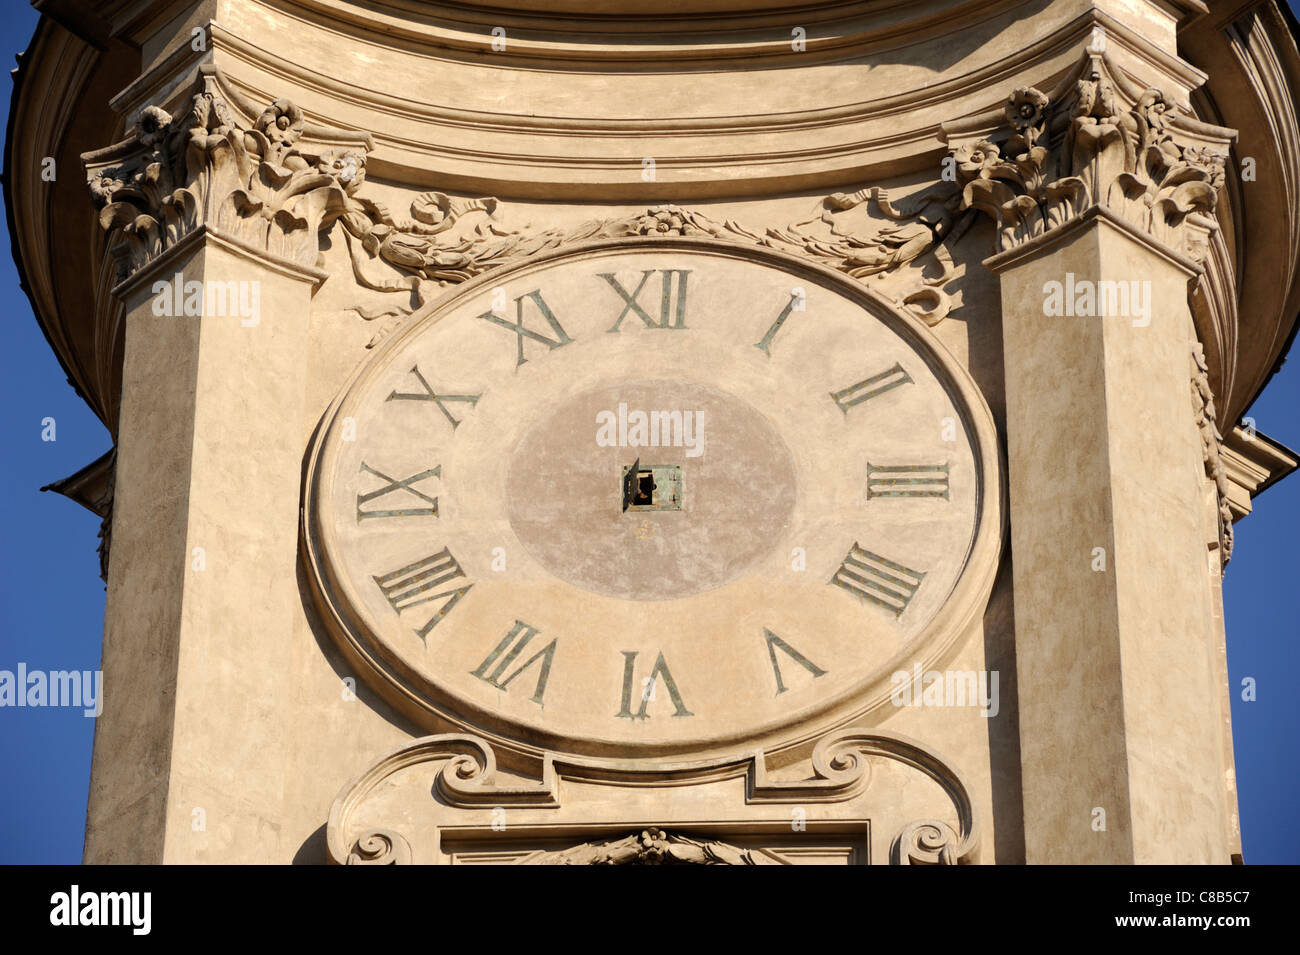 italy, rome, torre dell'orologio, clock tower, clock face without hour hands Stock Photo